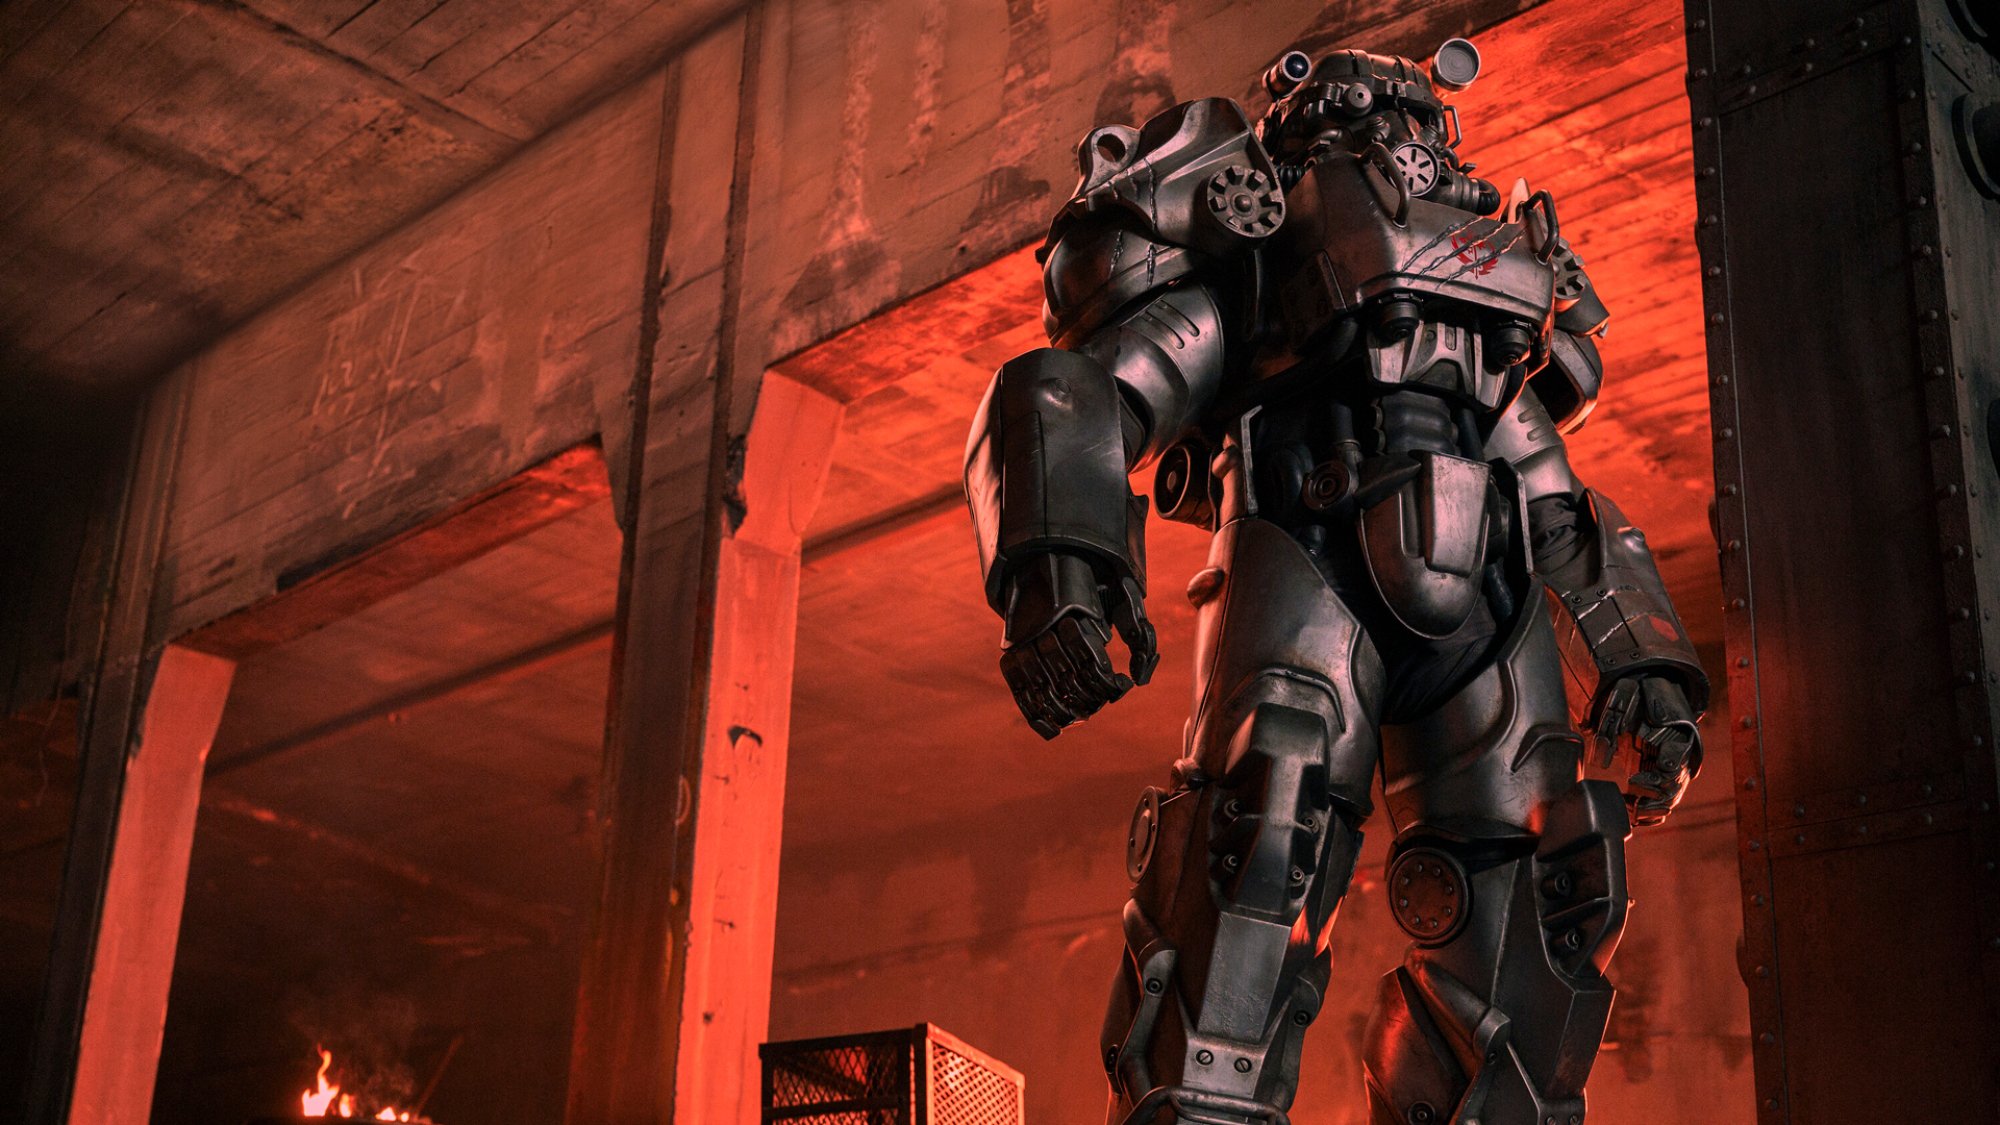 A huge suit of T-60 power armor from the game "Fallout" seen in the TV series.